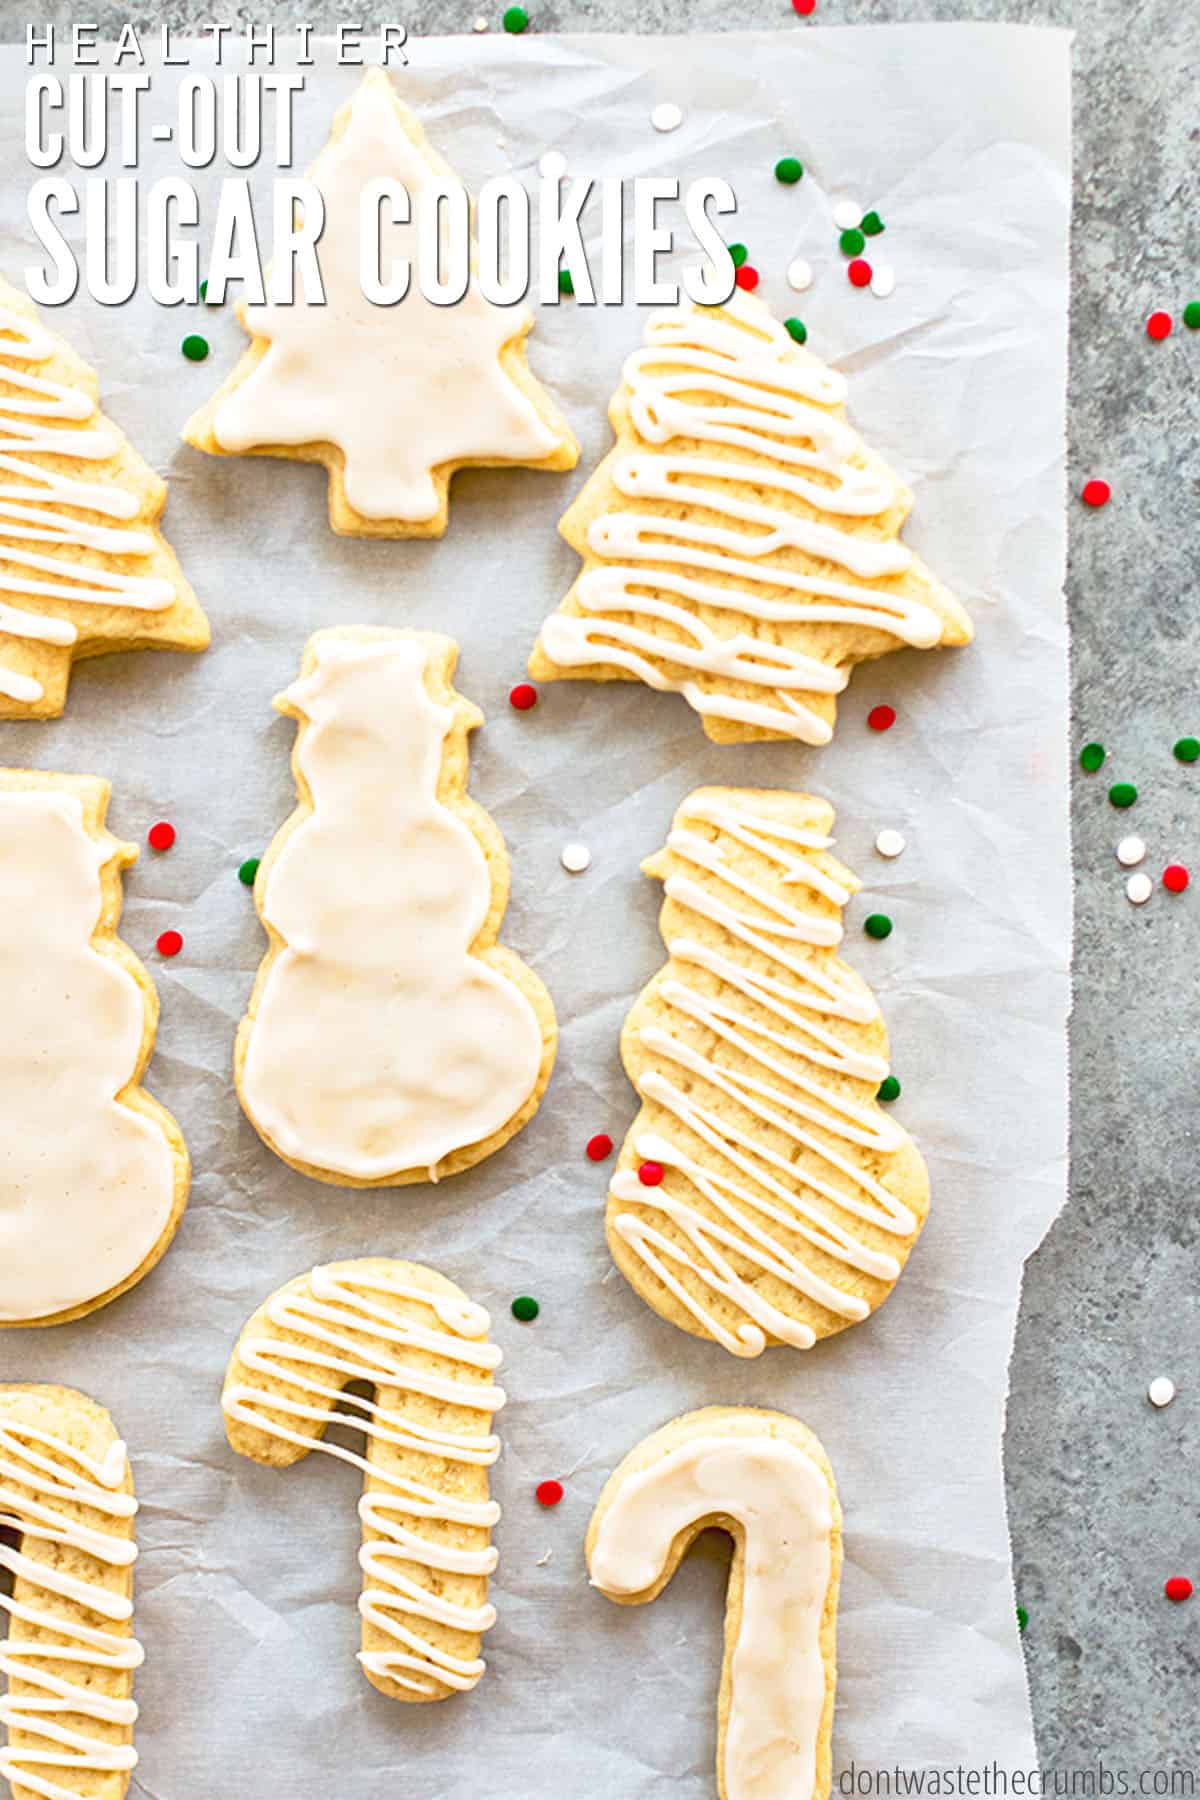 Nine freshly baked sugar Christmas cookies with white icing are spread out on a piece of parchment paper. There are red, green, and white round sprinkles all around the cookies. The text overlay reads, "Healthier Cut Out Sugar Cookies."